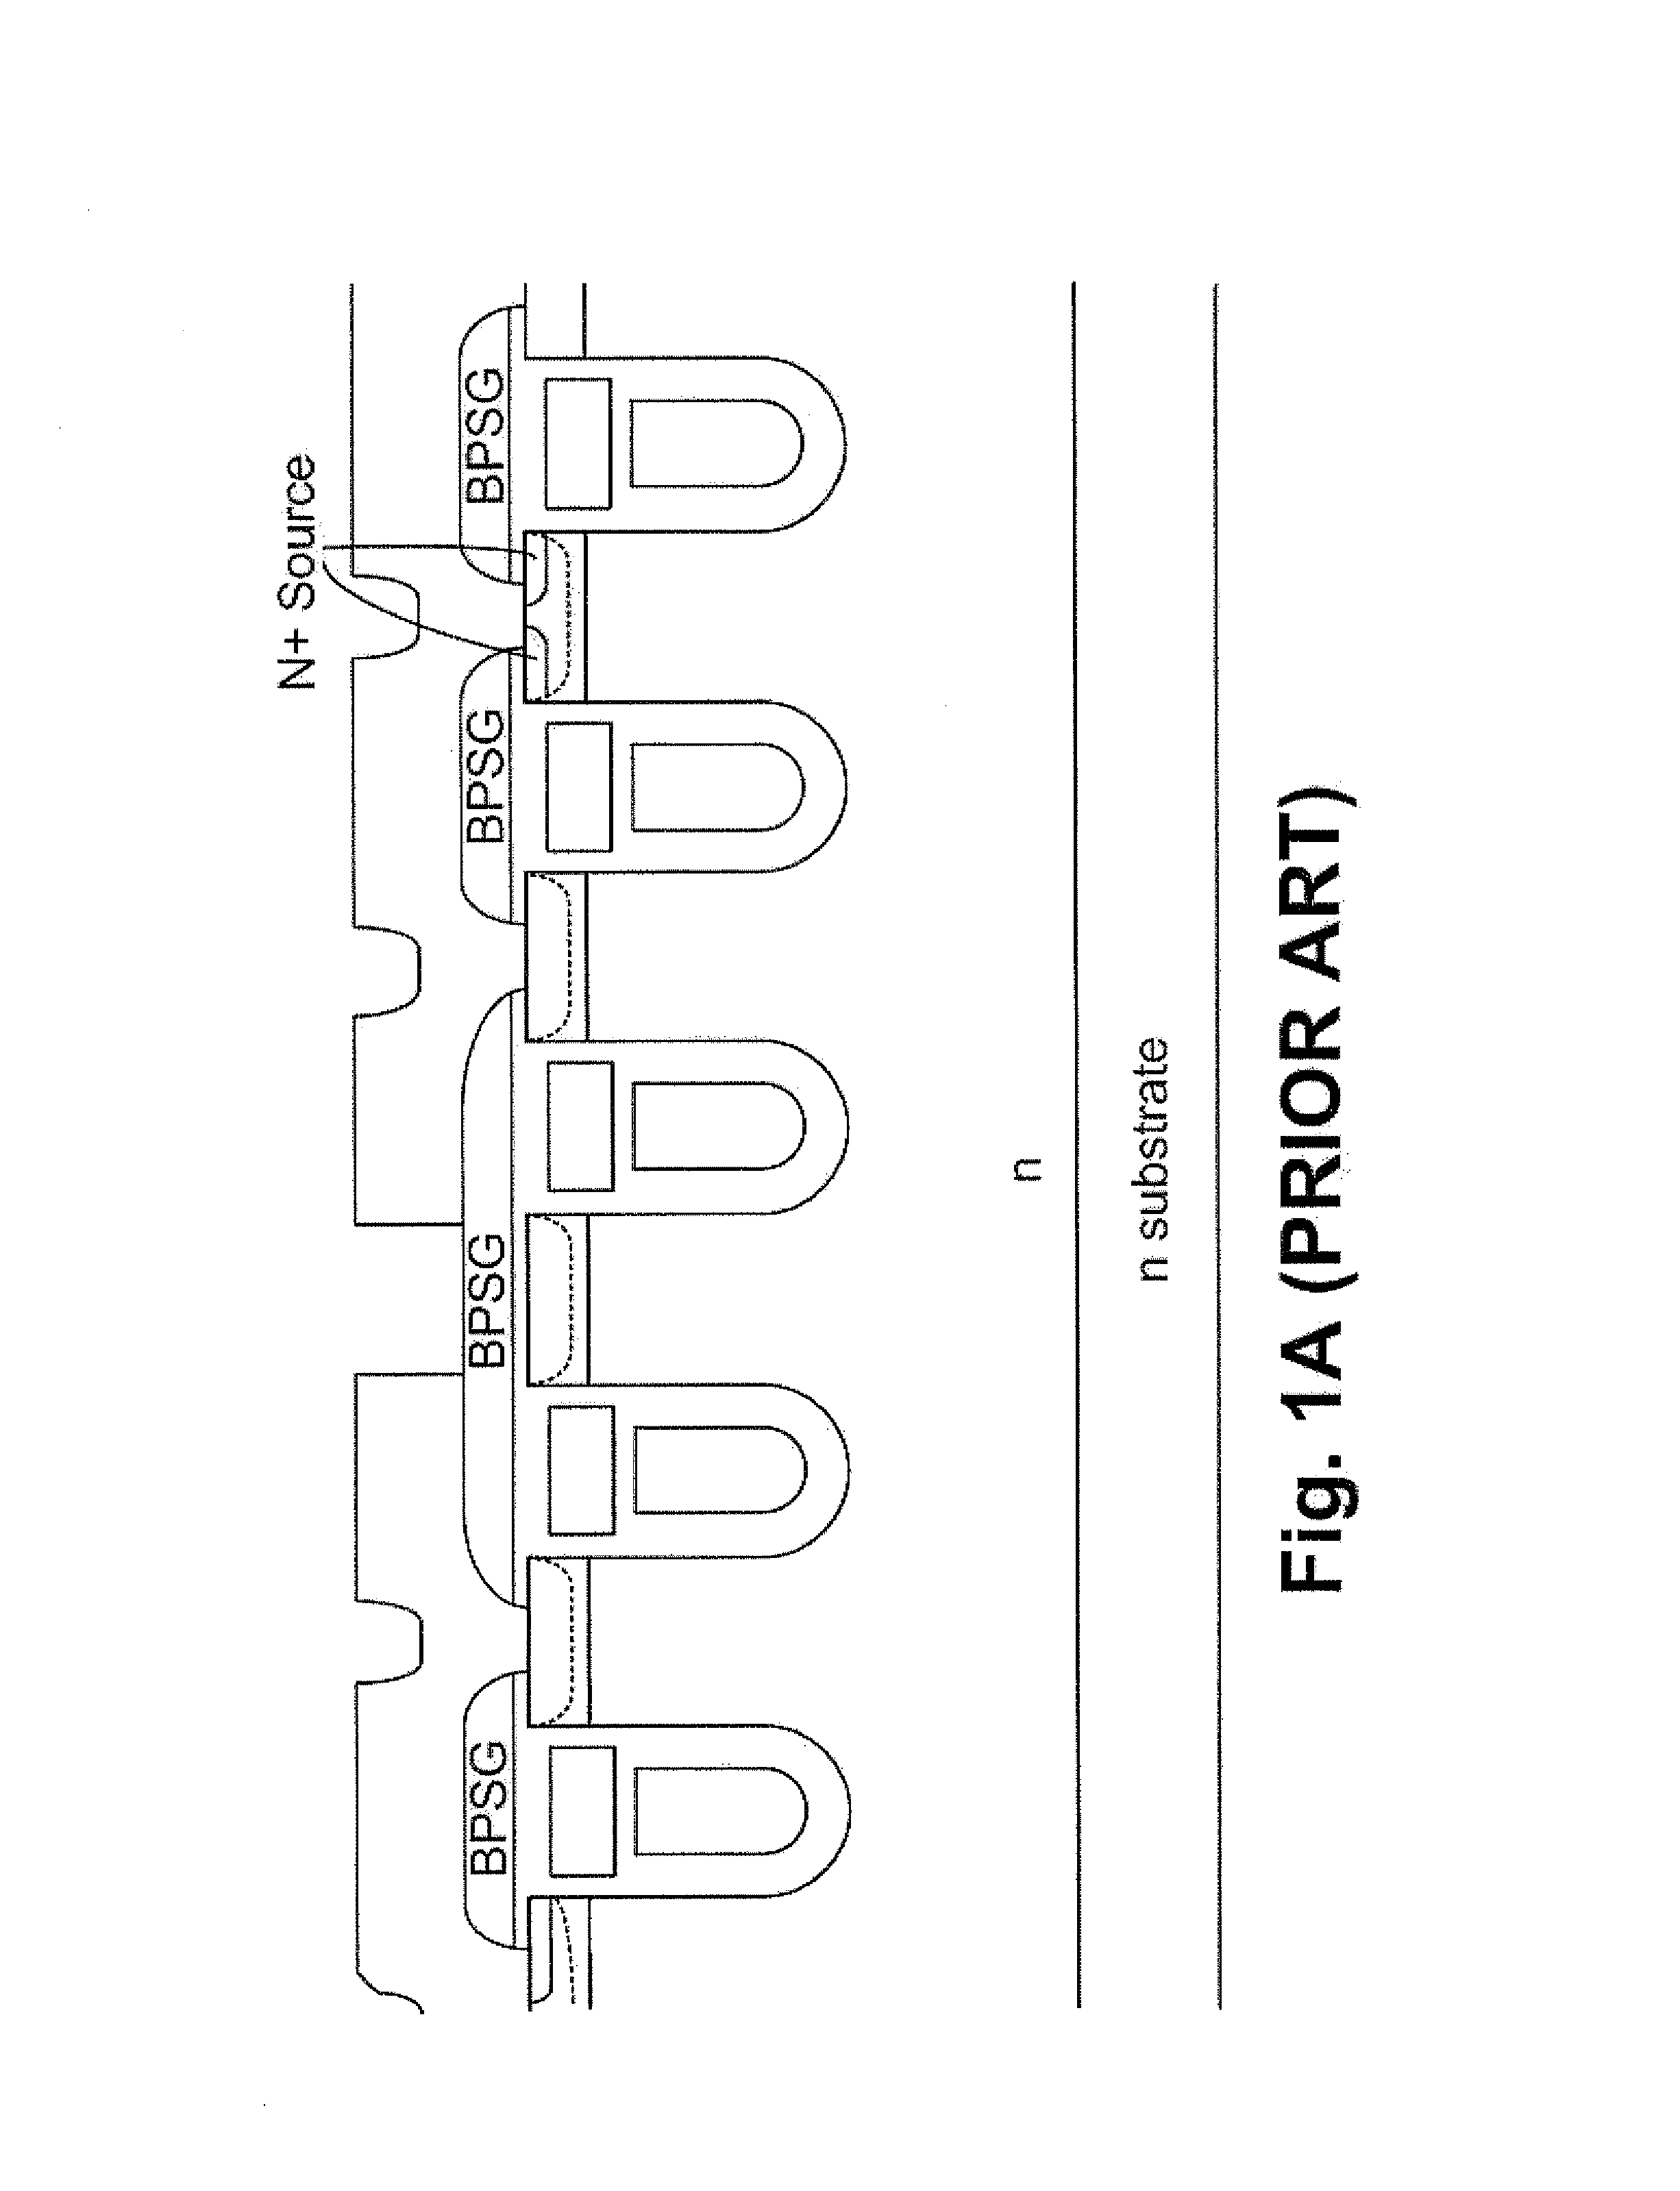 Semiconductor power devices integrated with a trenched clamp diode